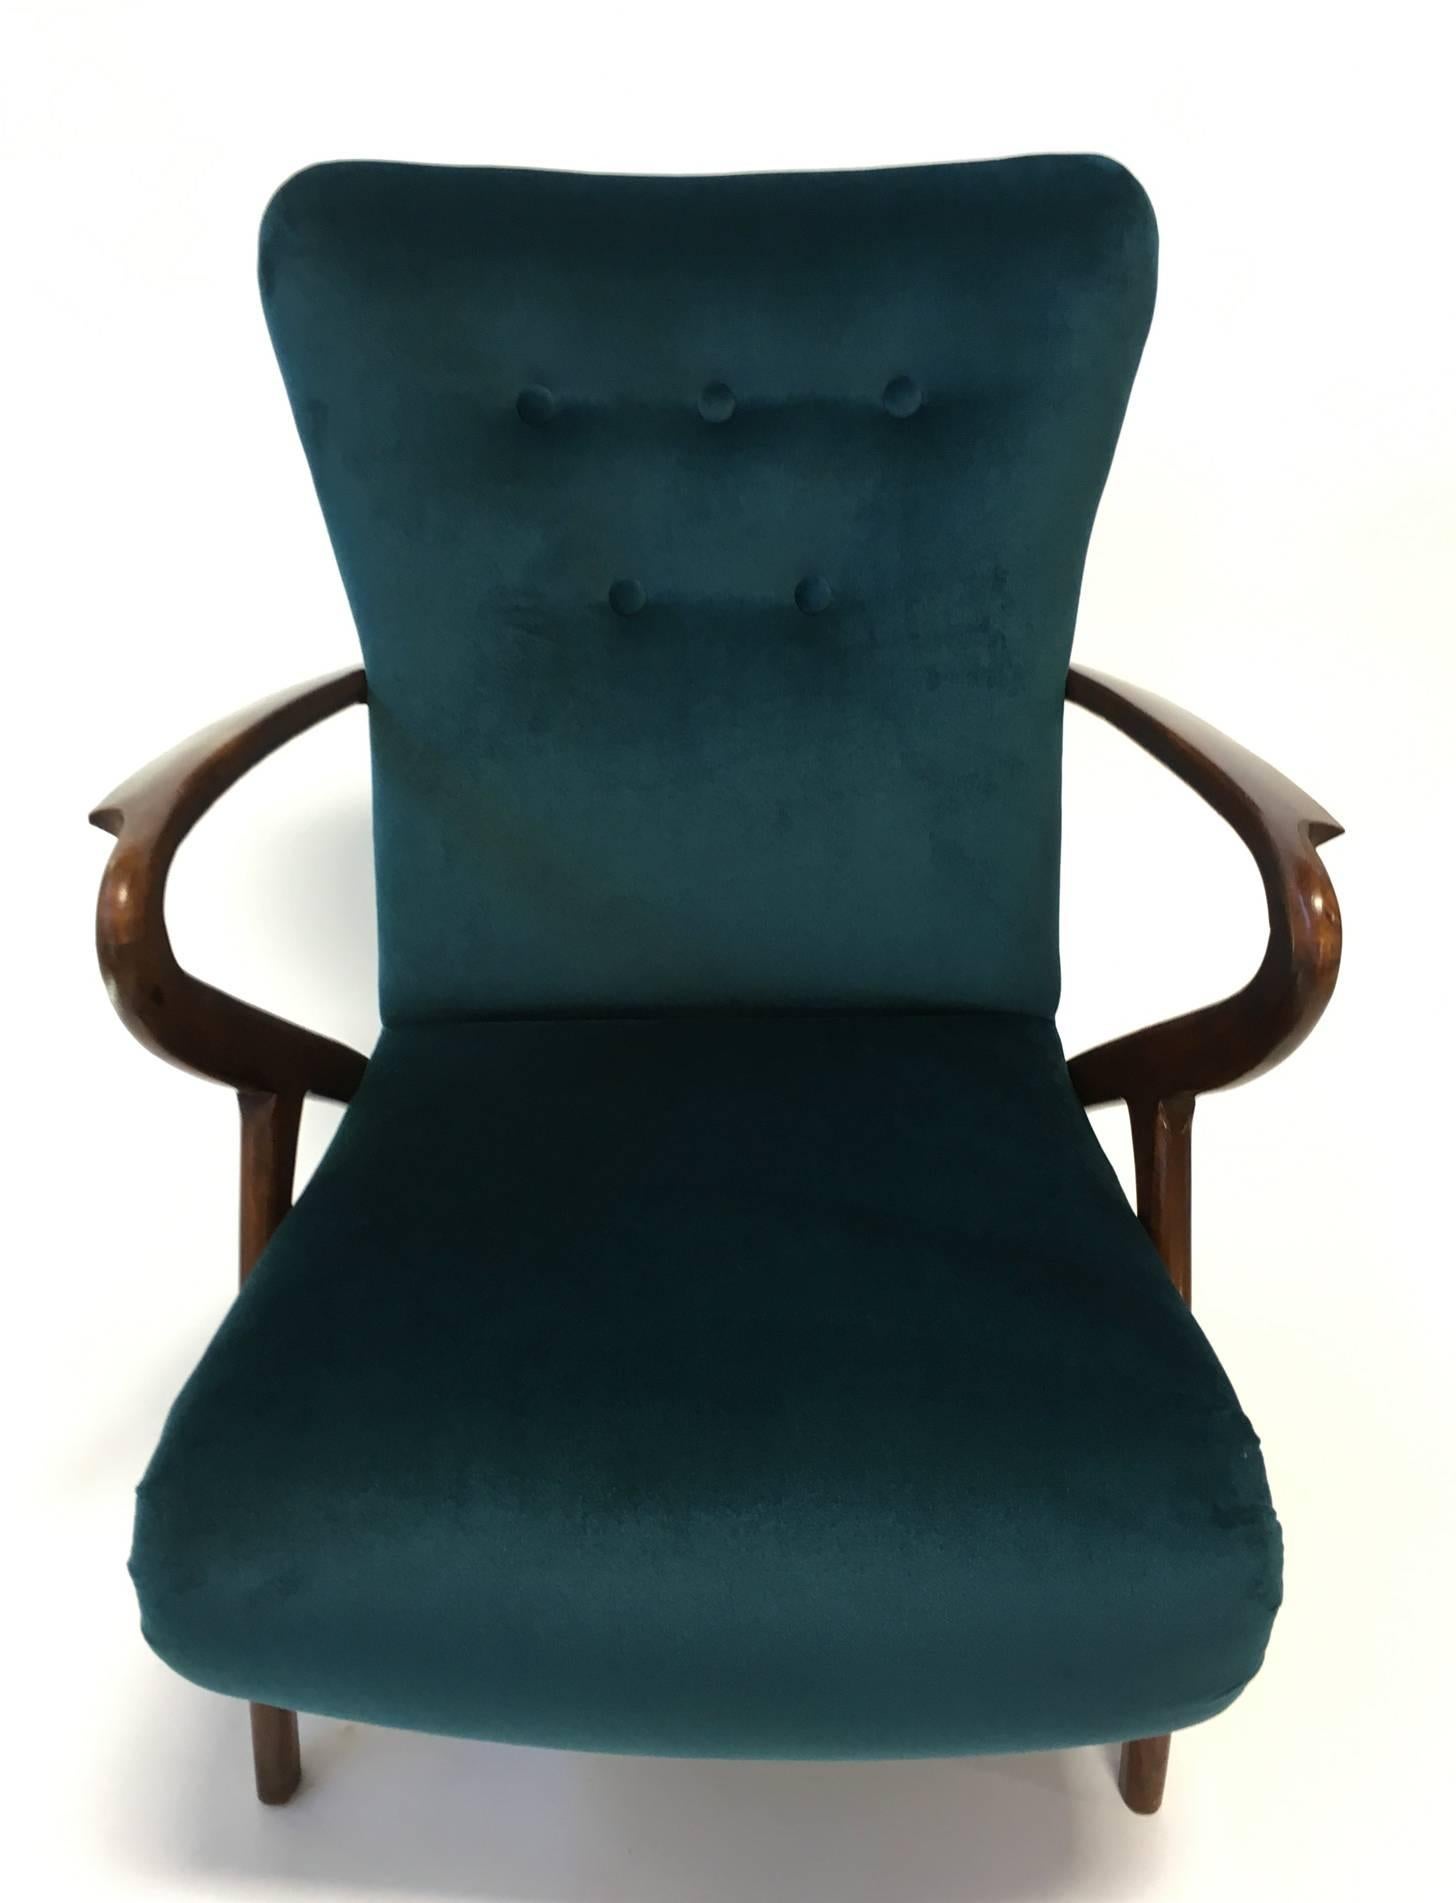 Mid-20th Century Sculptural Italian Lounge Chair For Sale